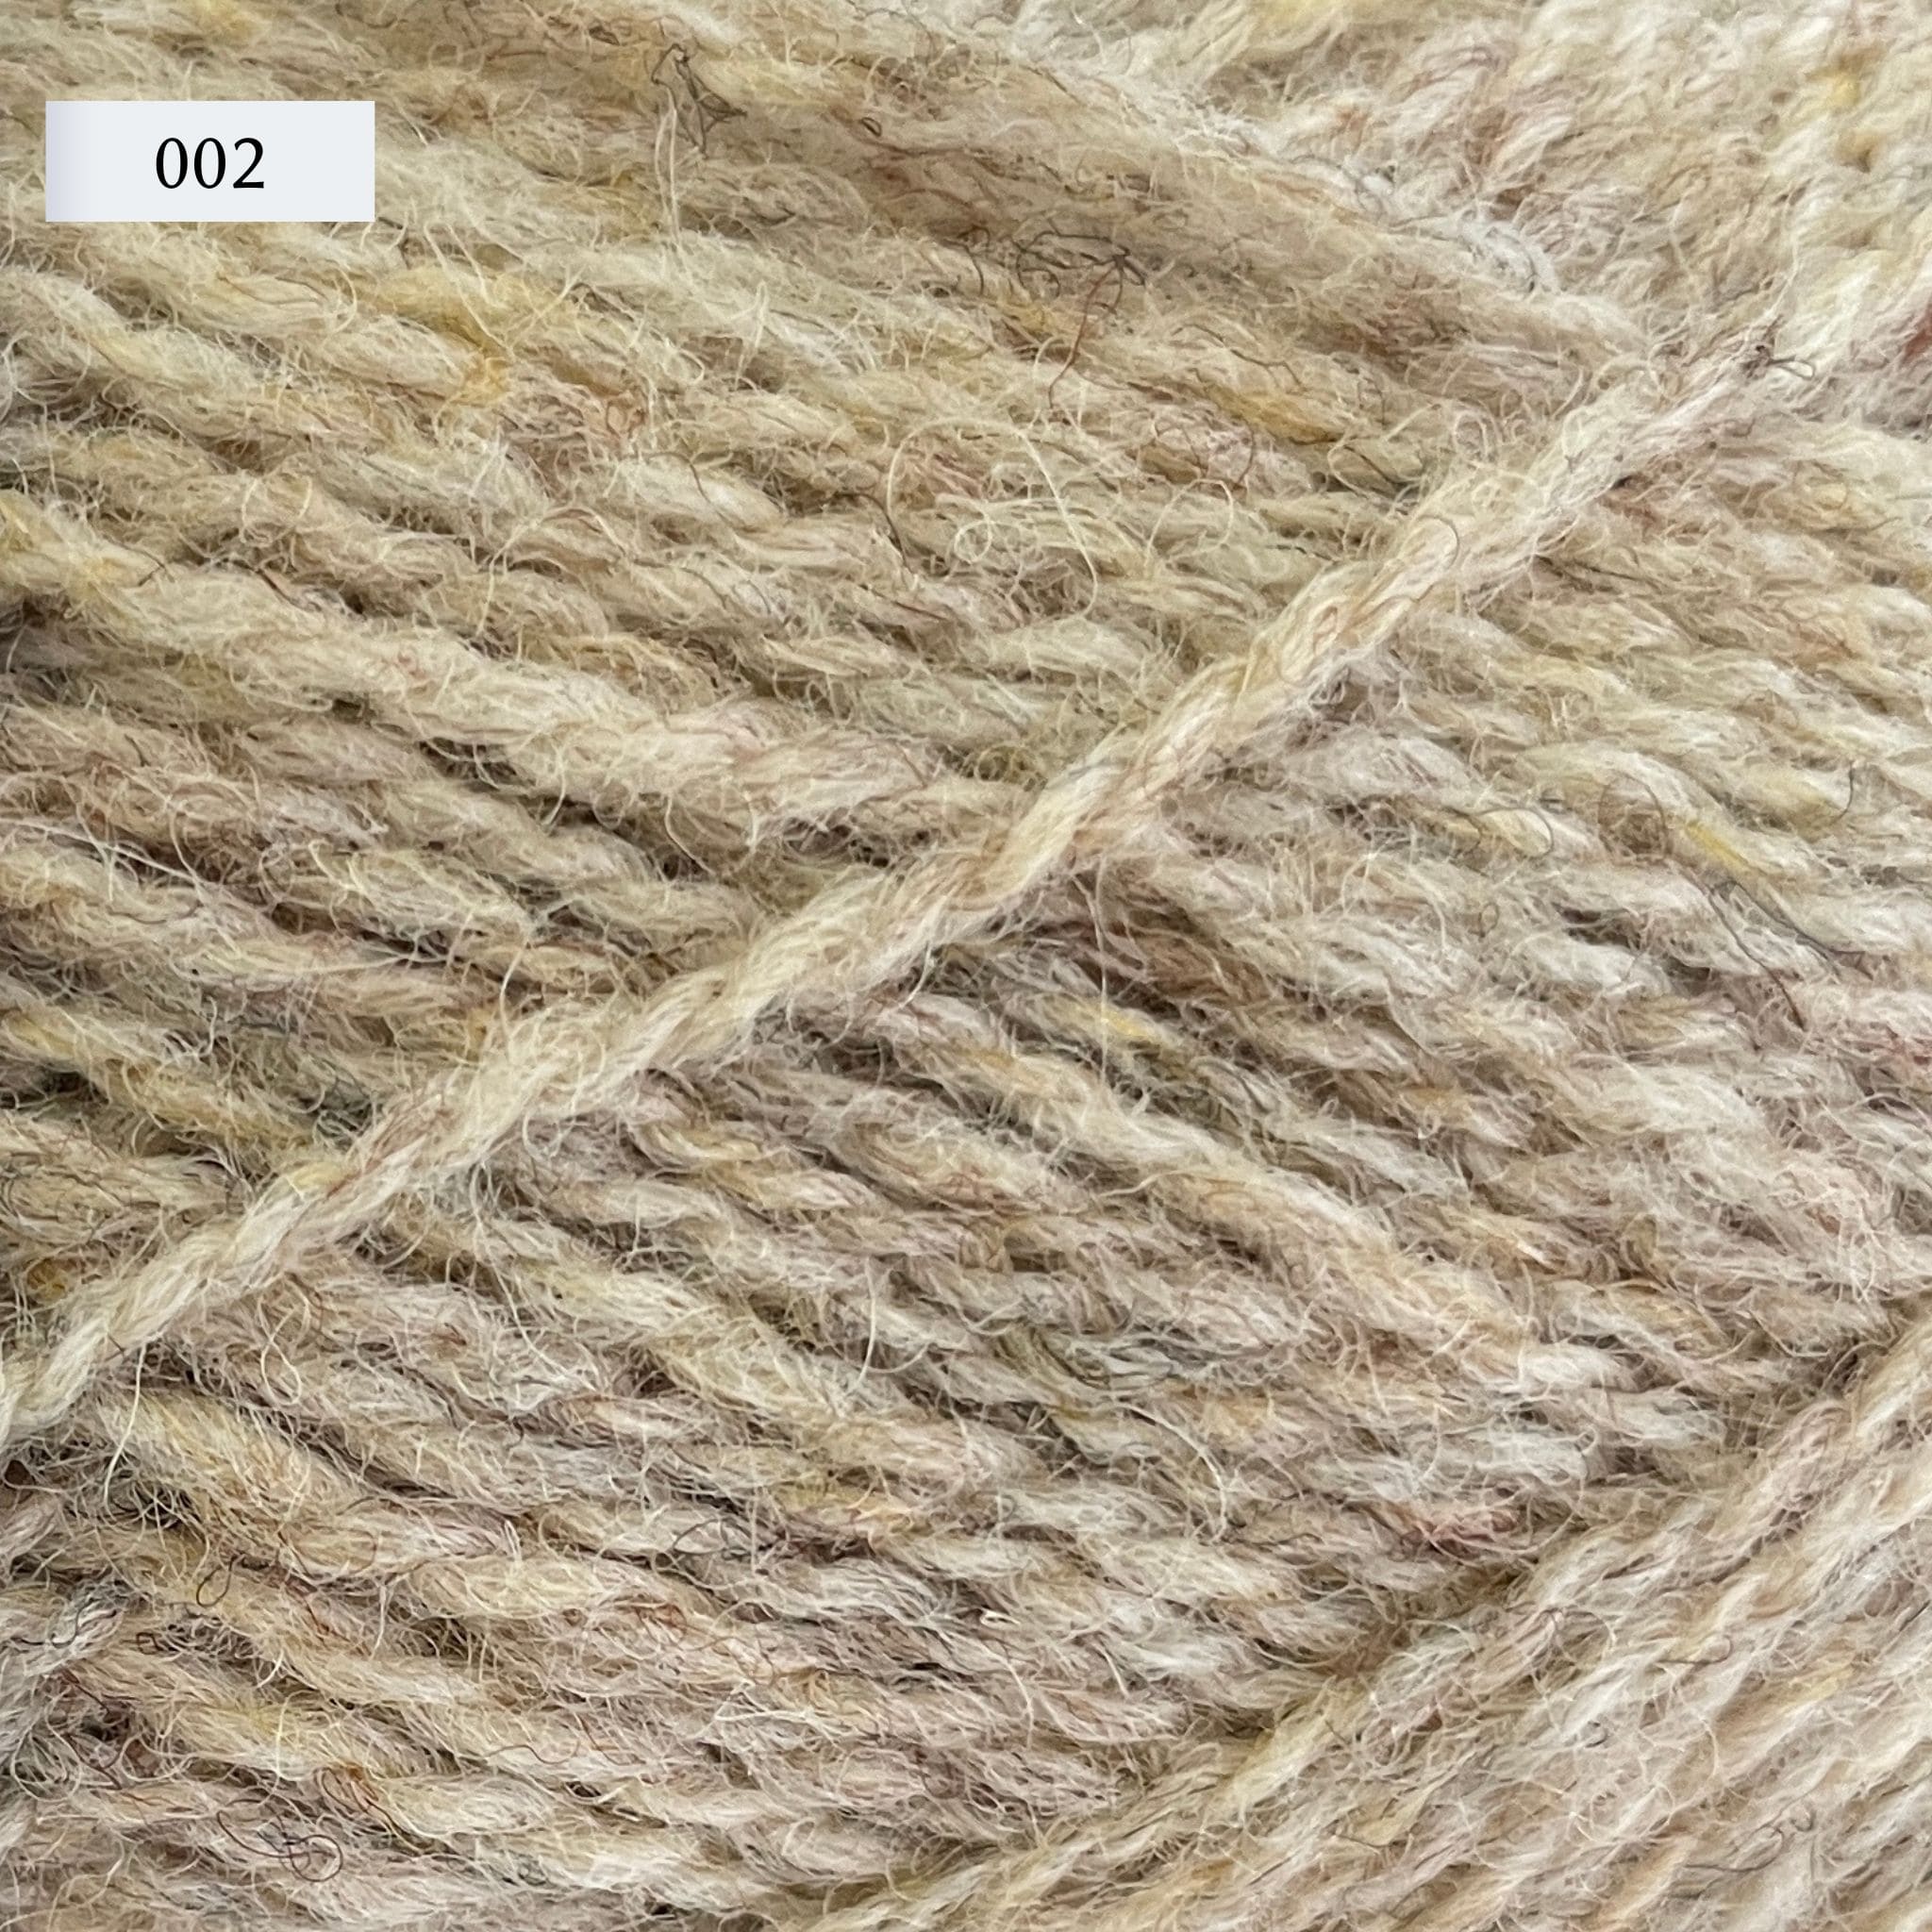 Jamieson & Smith 2ply Jumper Weight, light fingering weight yarn, in color 002, a very light heathered tan